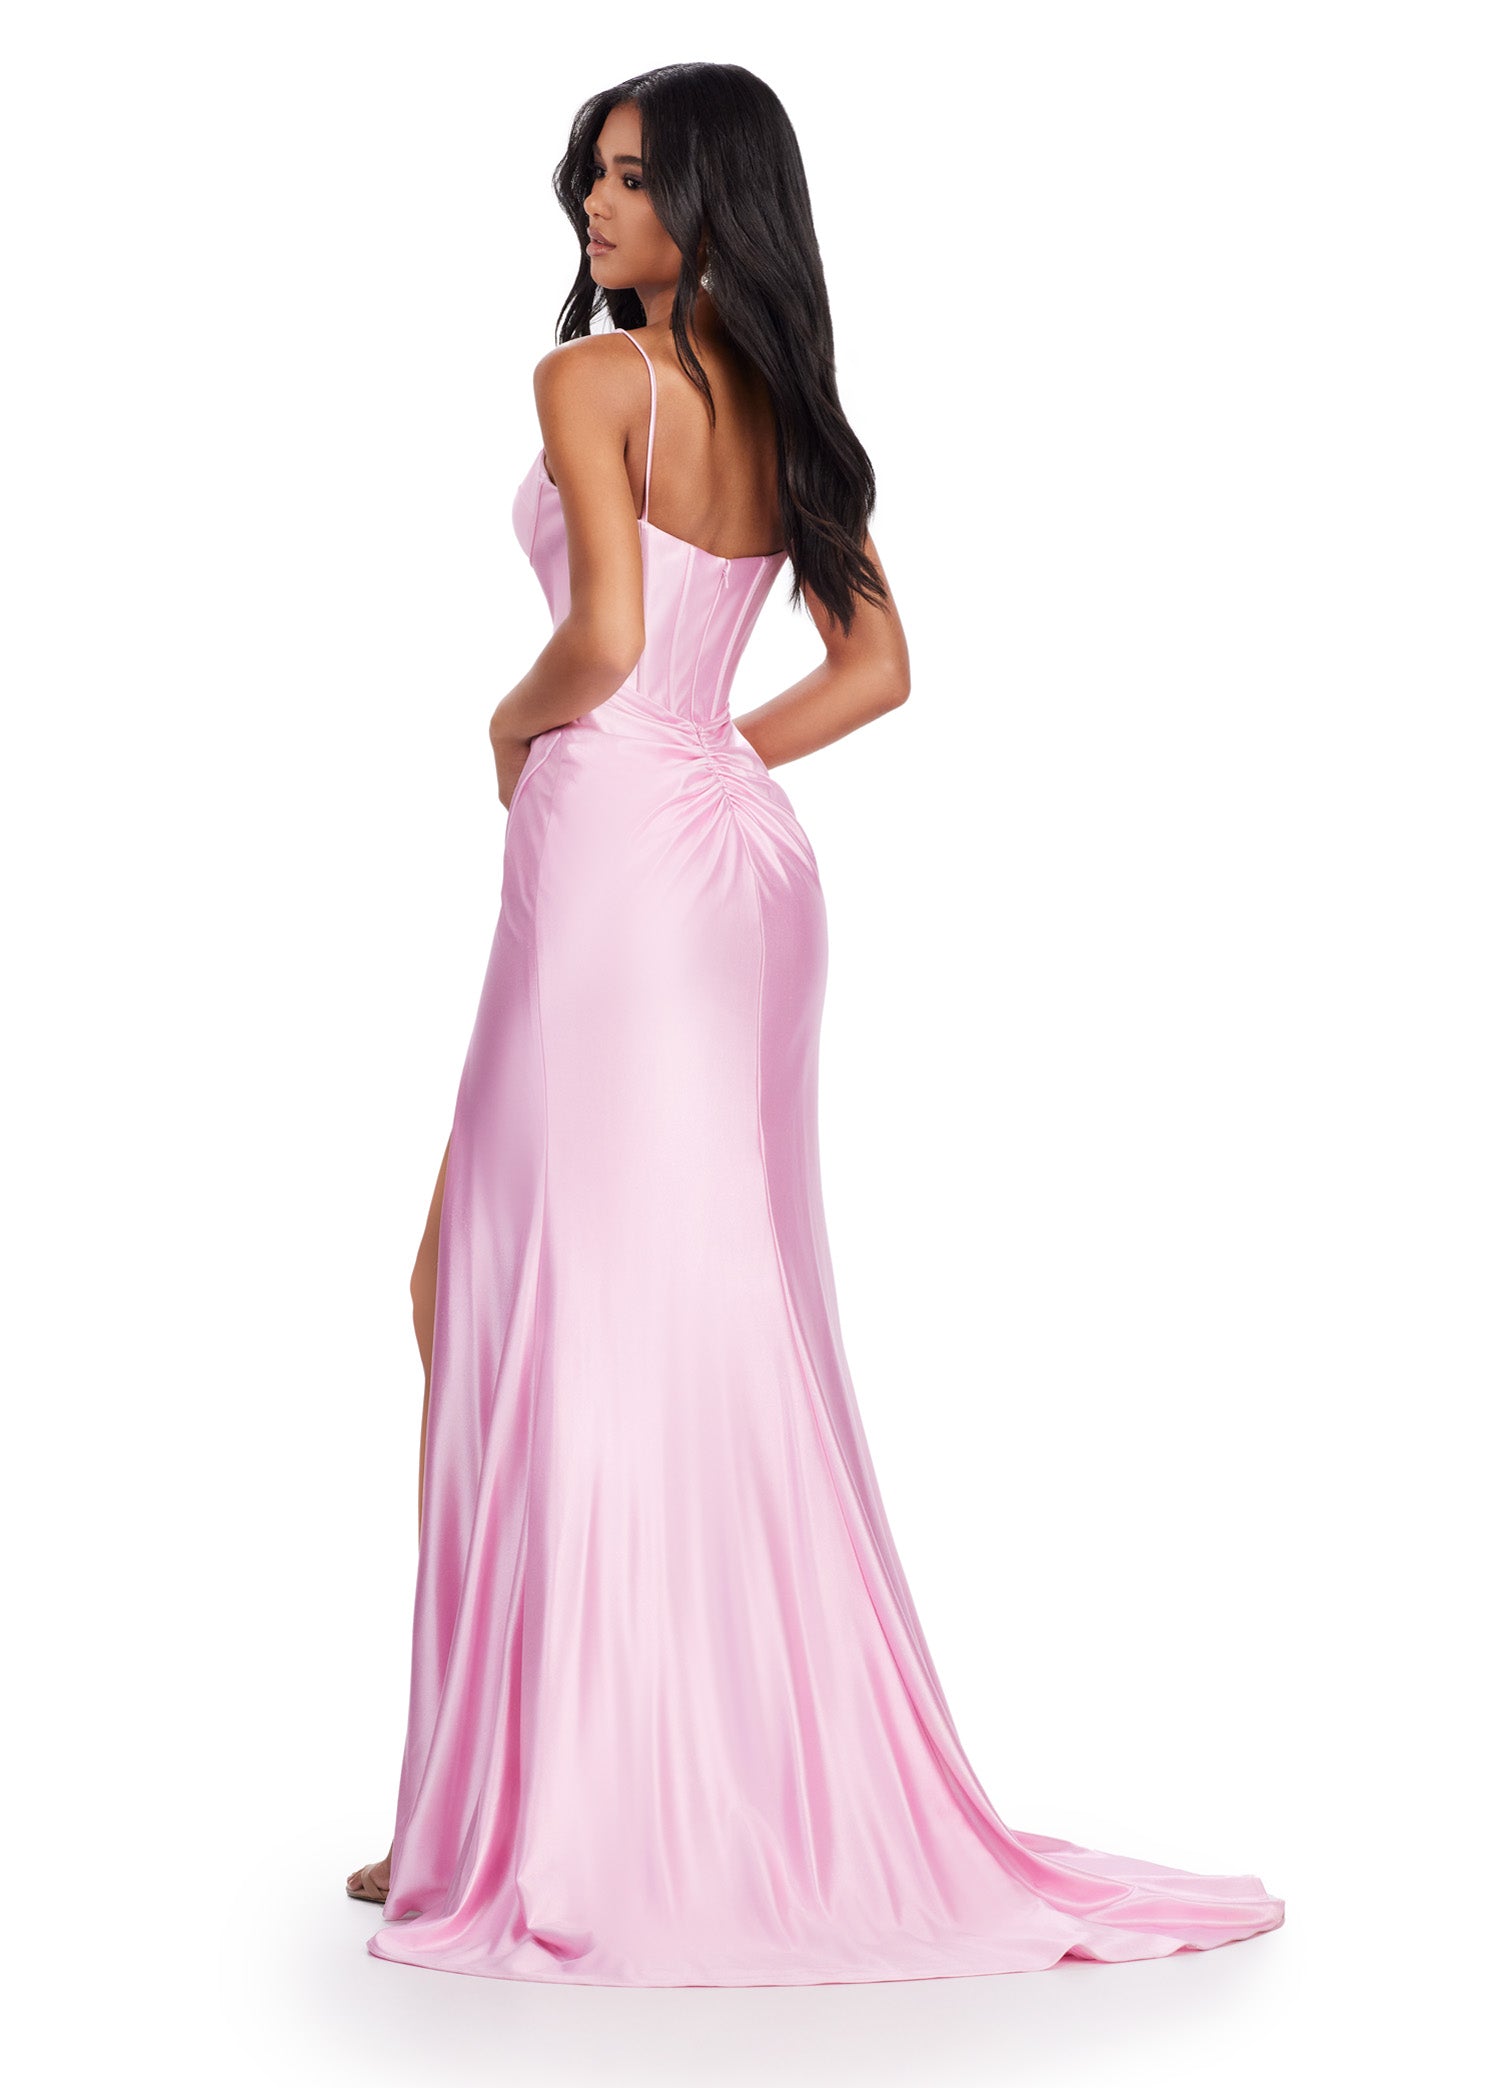 This formal Ashley Lauren 11549 prom dress features a flattering spaghetti strap corset bustier and a stylish slit. Perfect for pageants and formal events, this gown will make you feel confident and elegant. Red carpet ready! This jersey gown features a spaghetti strap design with a corset bustier and ruched skirt with a slit.